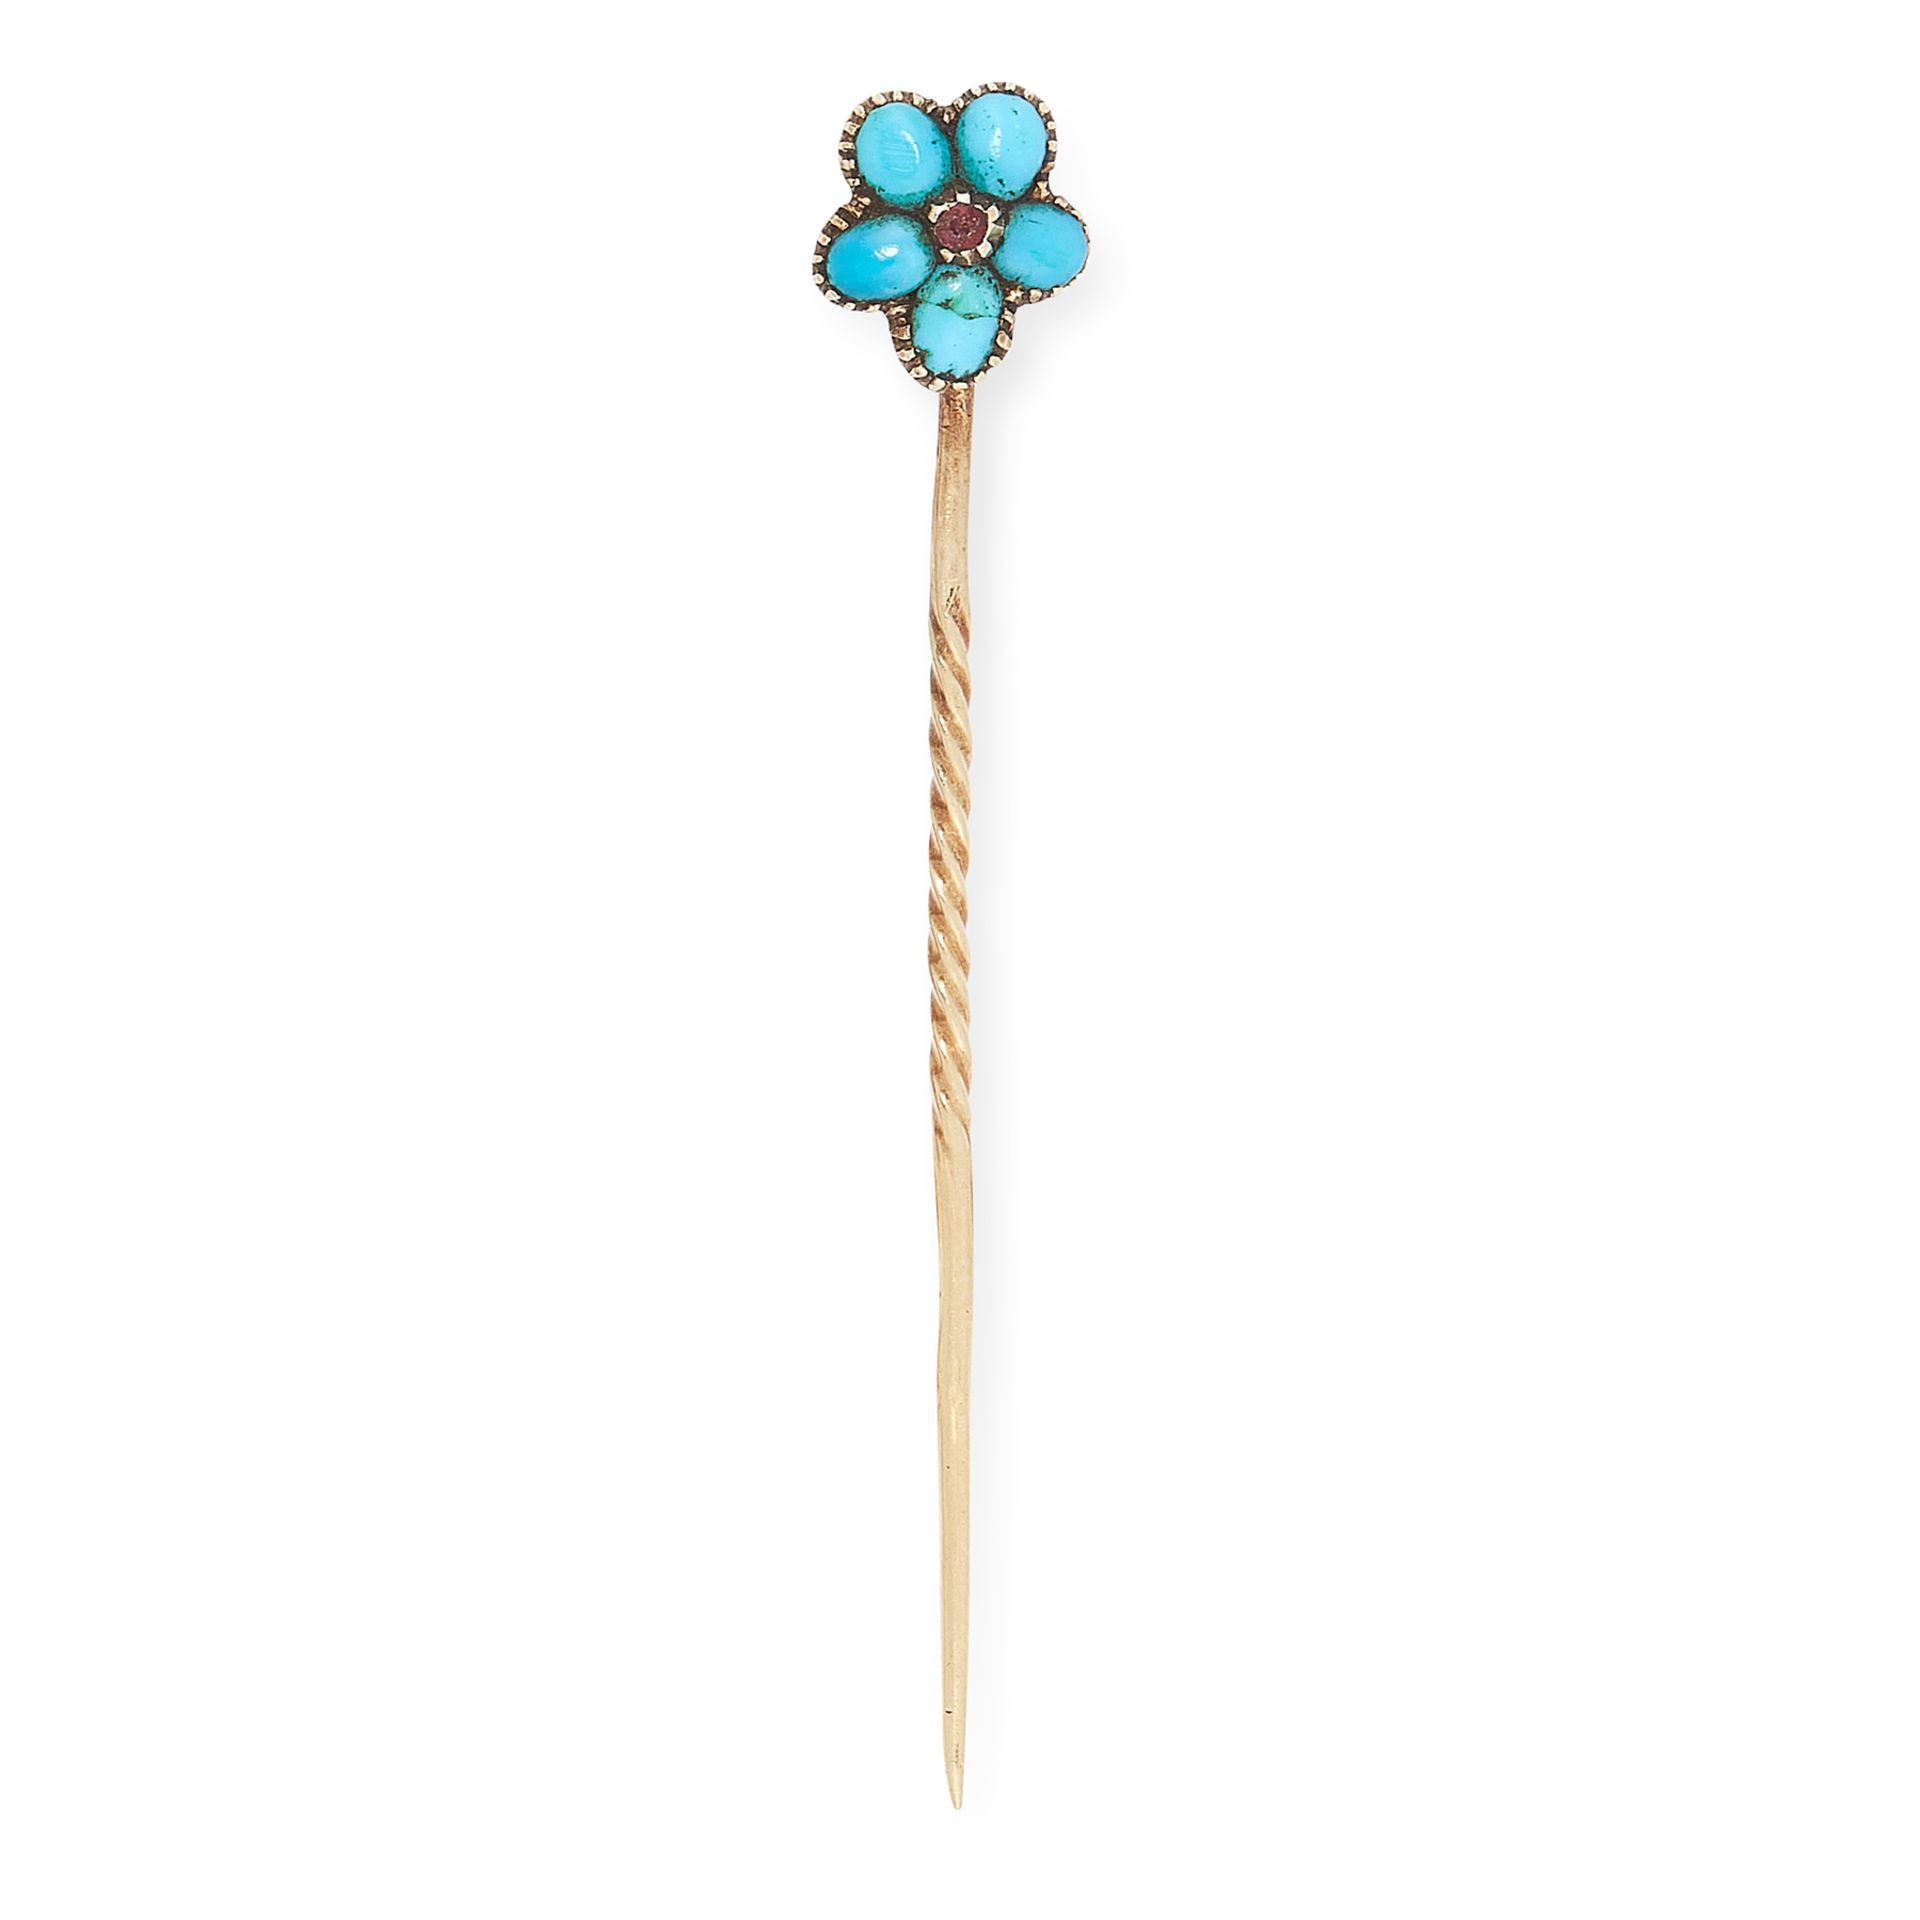 AN ANTIQUE TURQUOISE AND RUBY FORGET-ME-NOT TIE PIN in yellow gold, the stick pin set with a